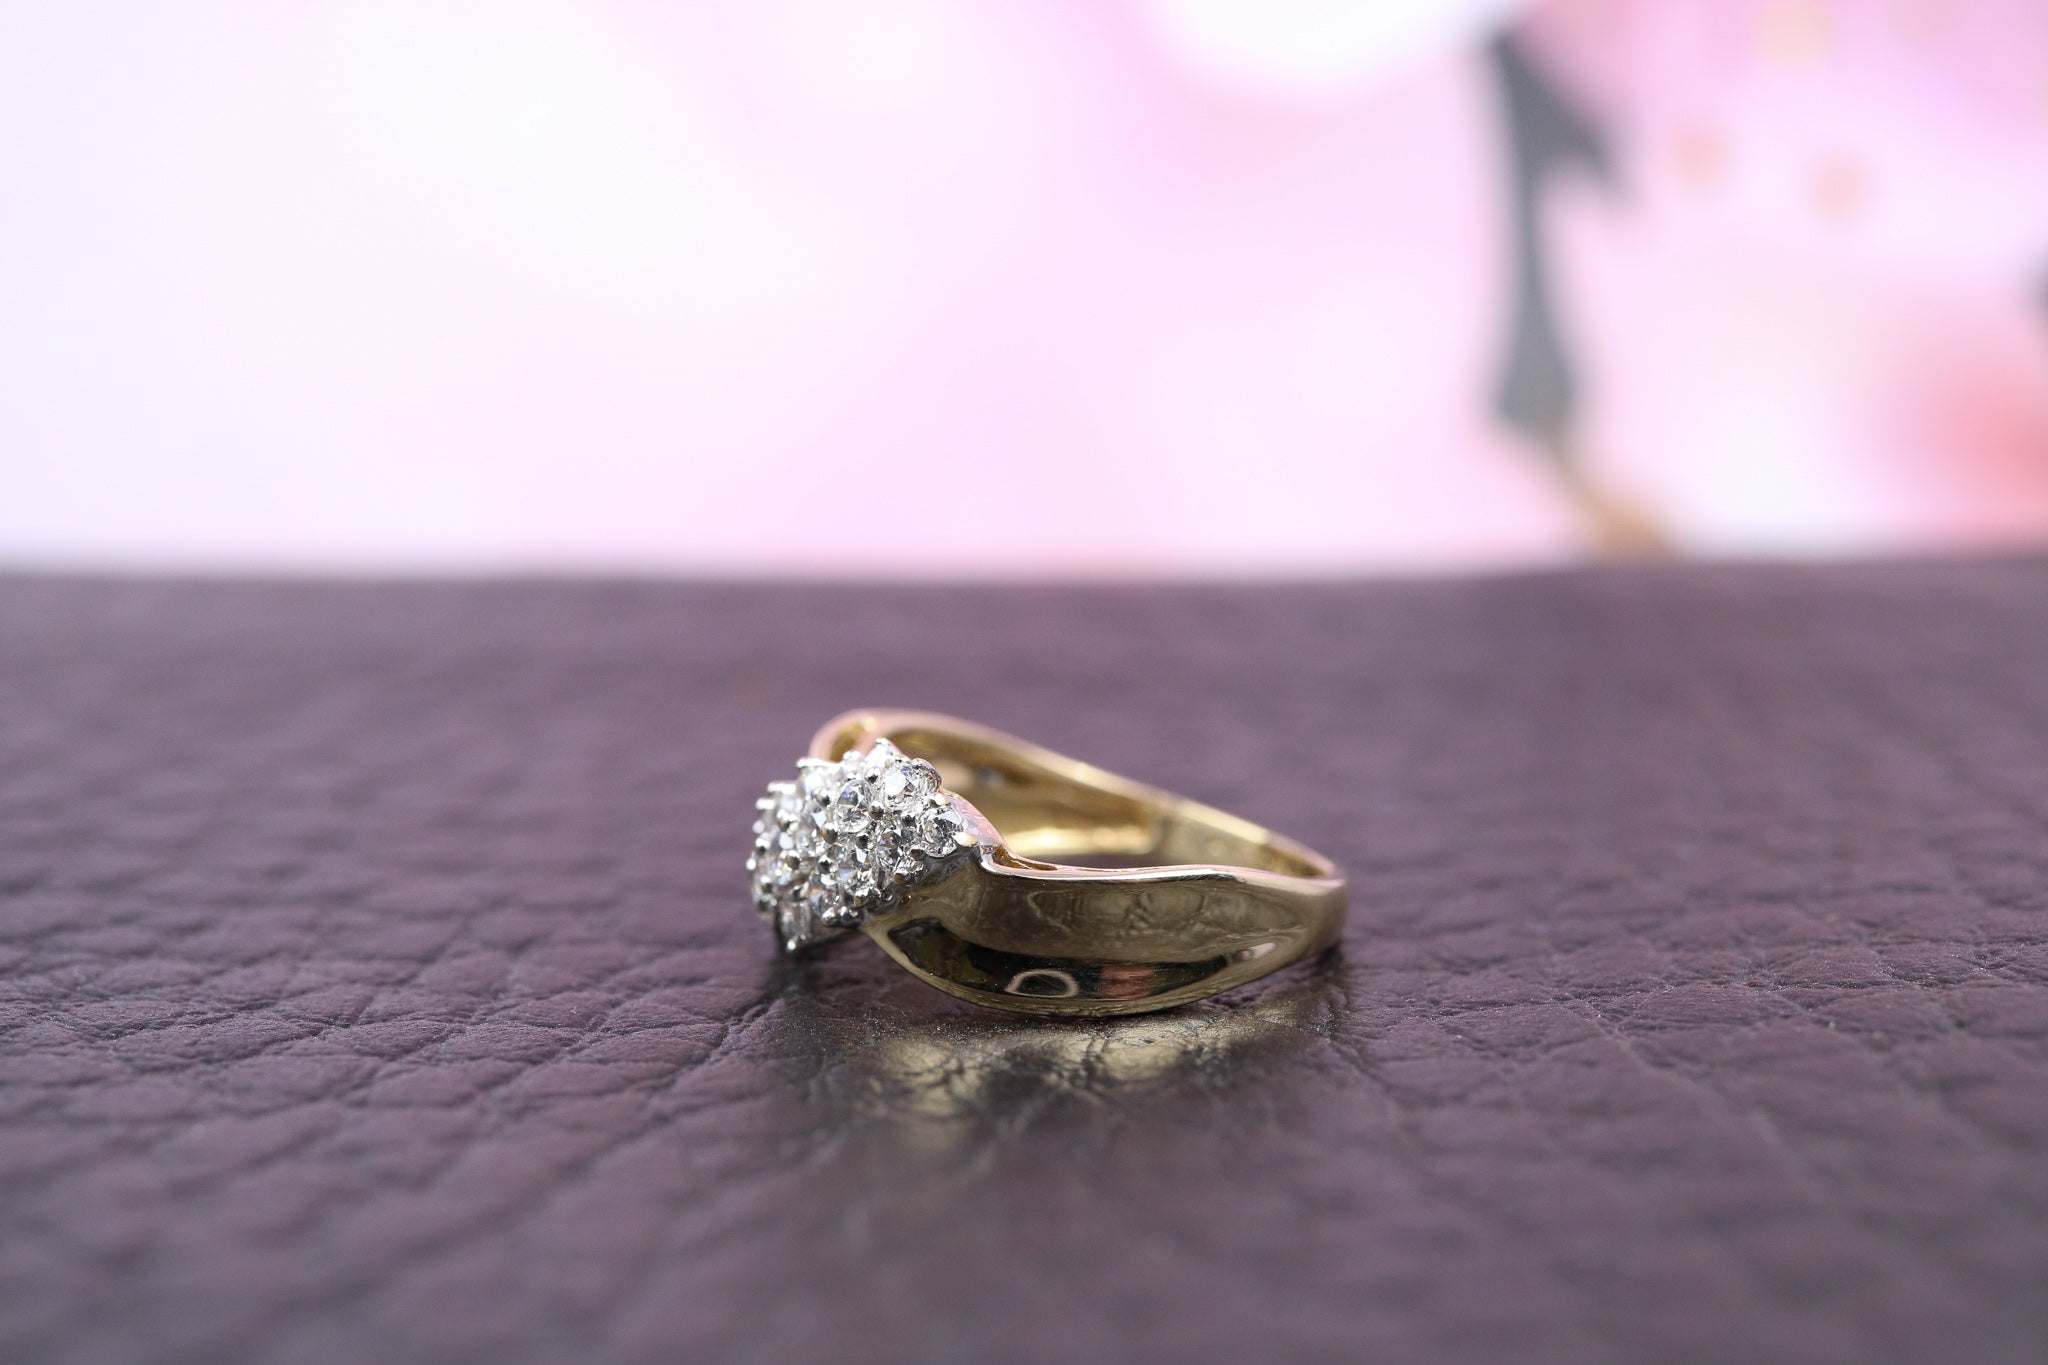 14ct Yellow Gold & Cubic Zirconia Ring - HJ2475 - Hallmark Jewellers Formby & The Jewellers Bench Widnes